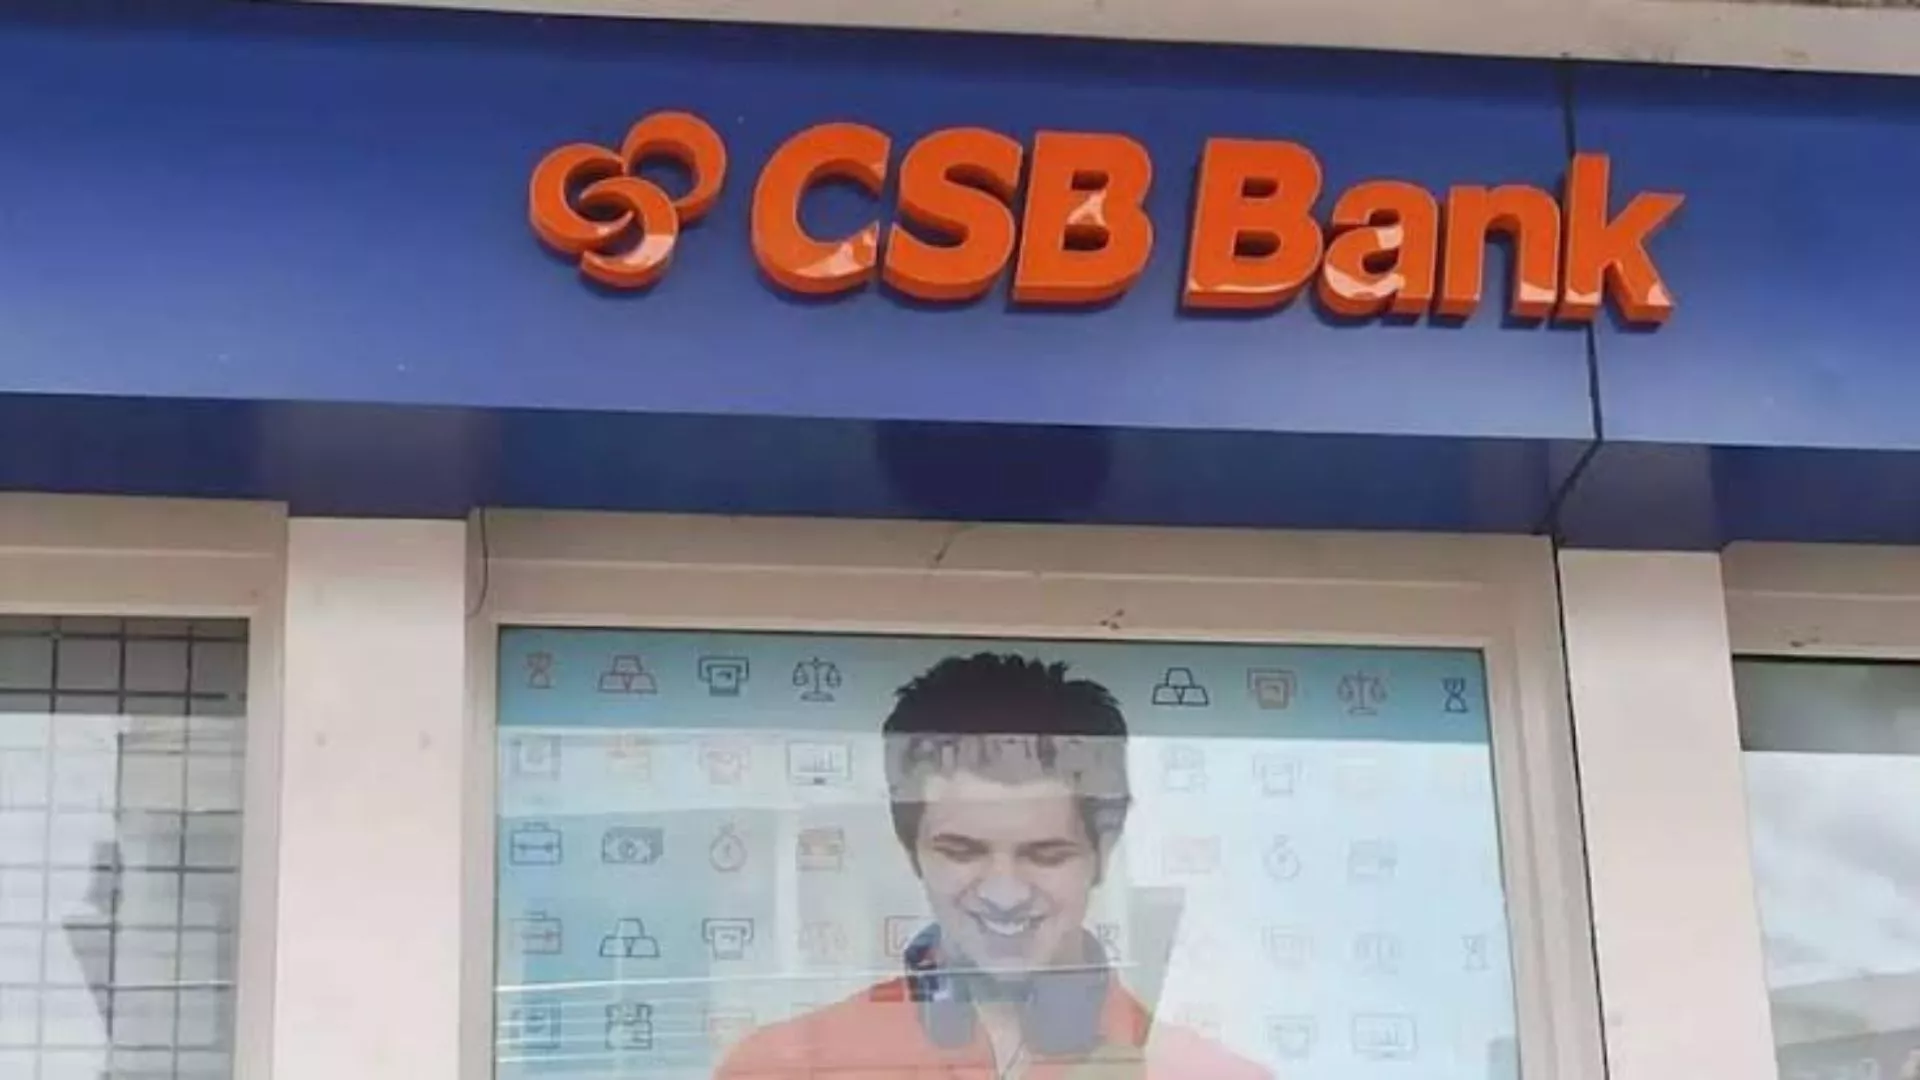 Catholic Syrian Bank Atm in T Dasarahalli,Bangalore - Best ATM in Bangalore  - Justdial